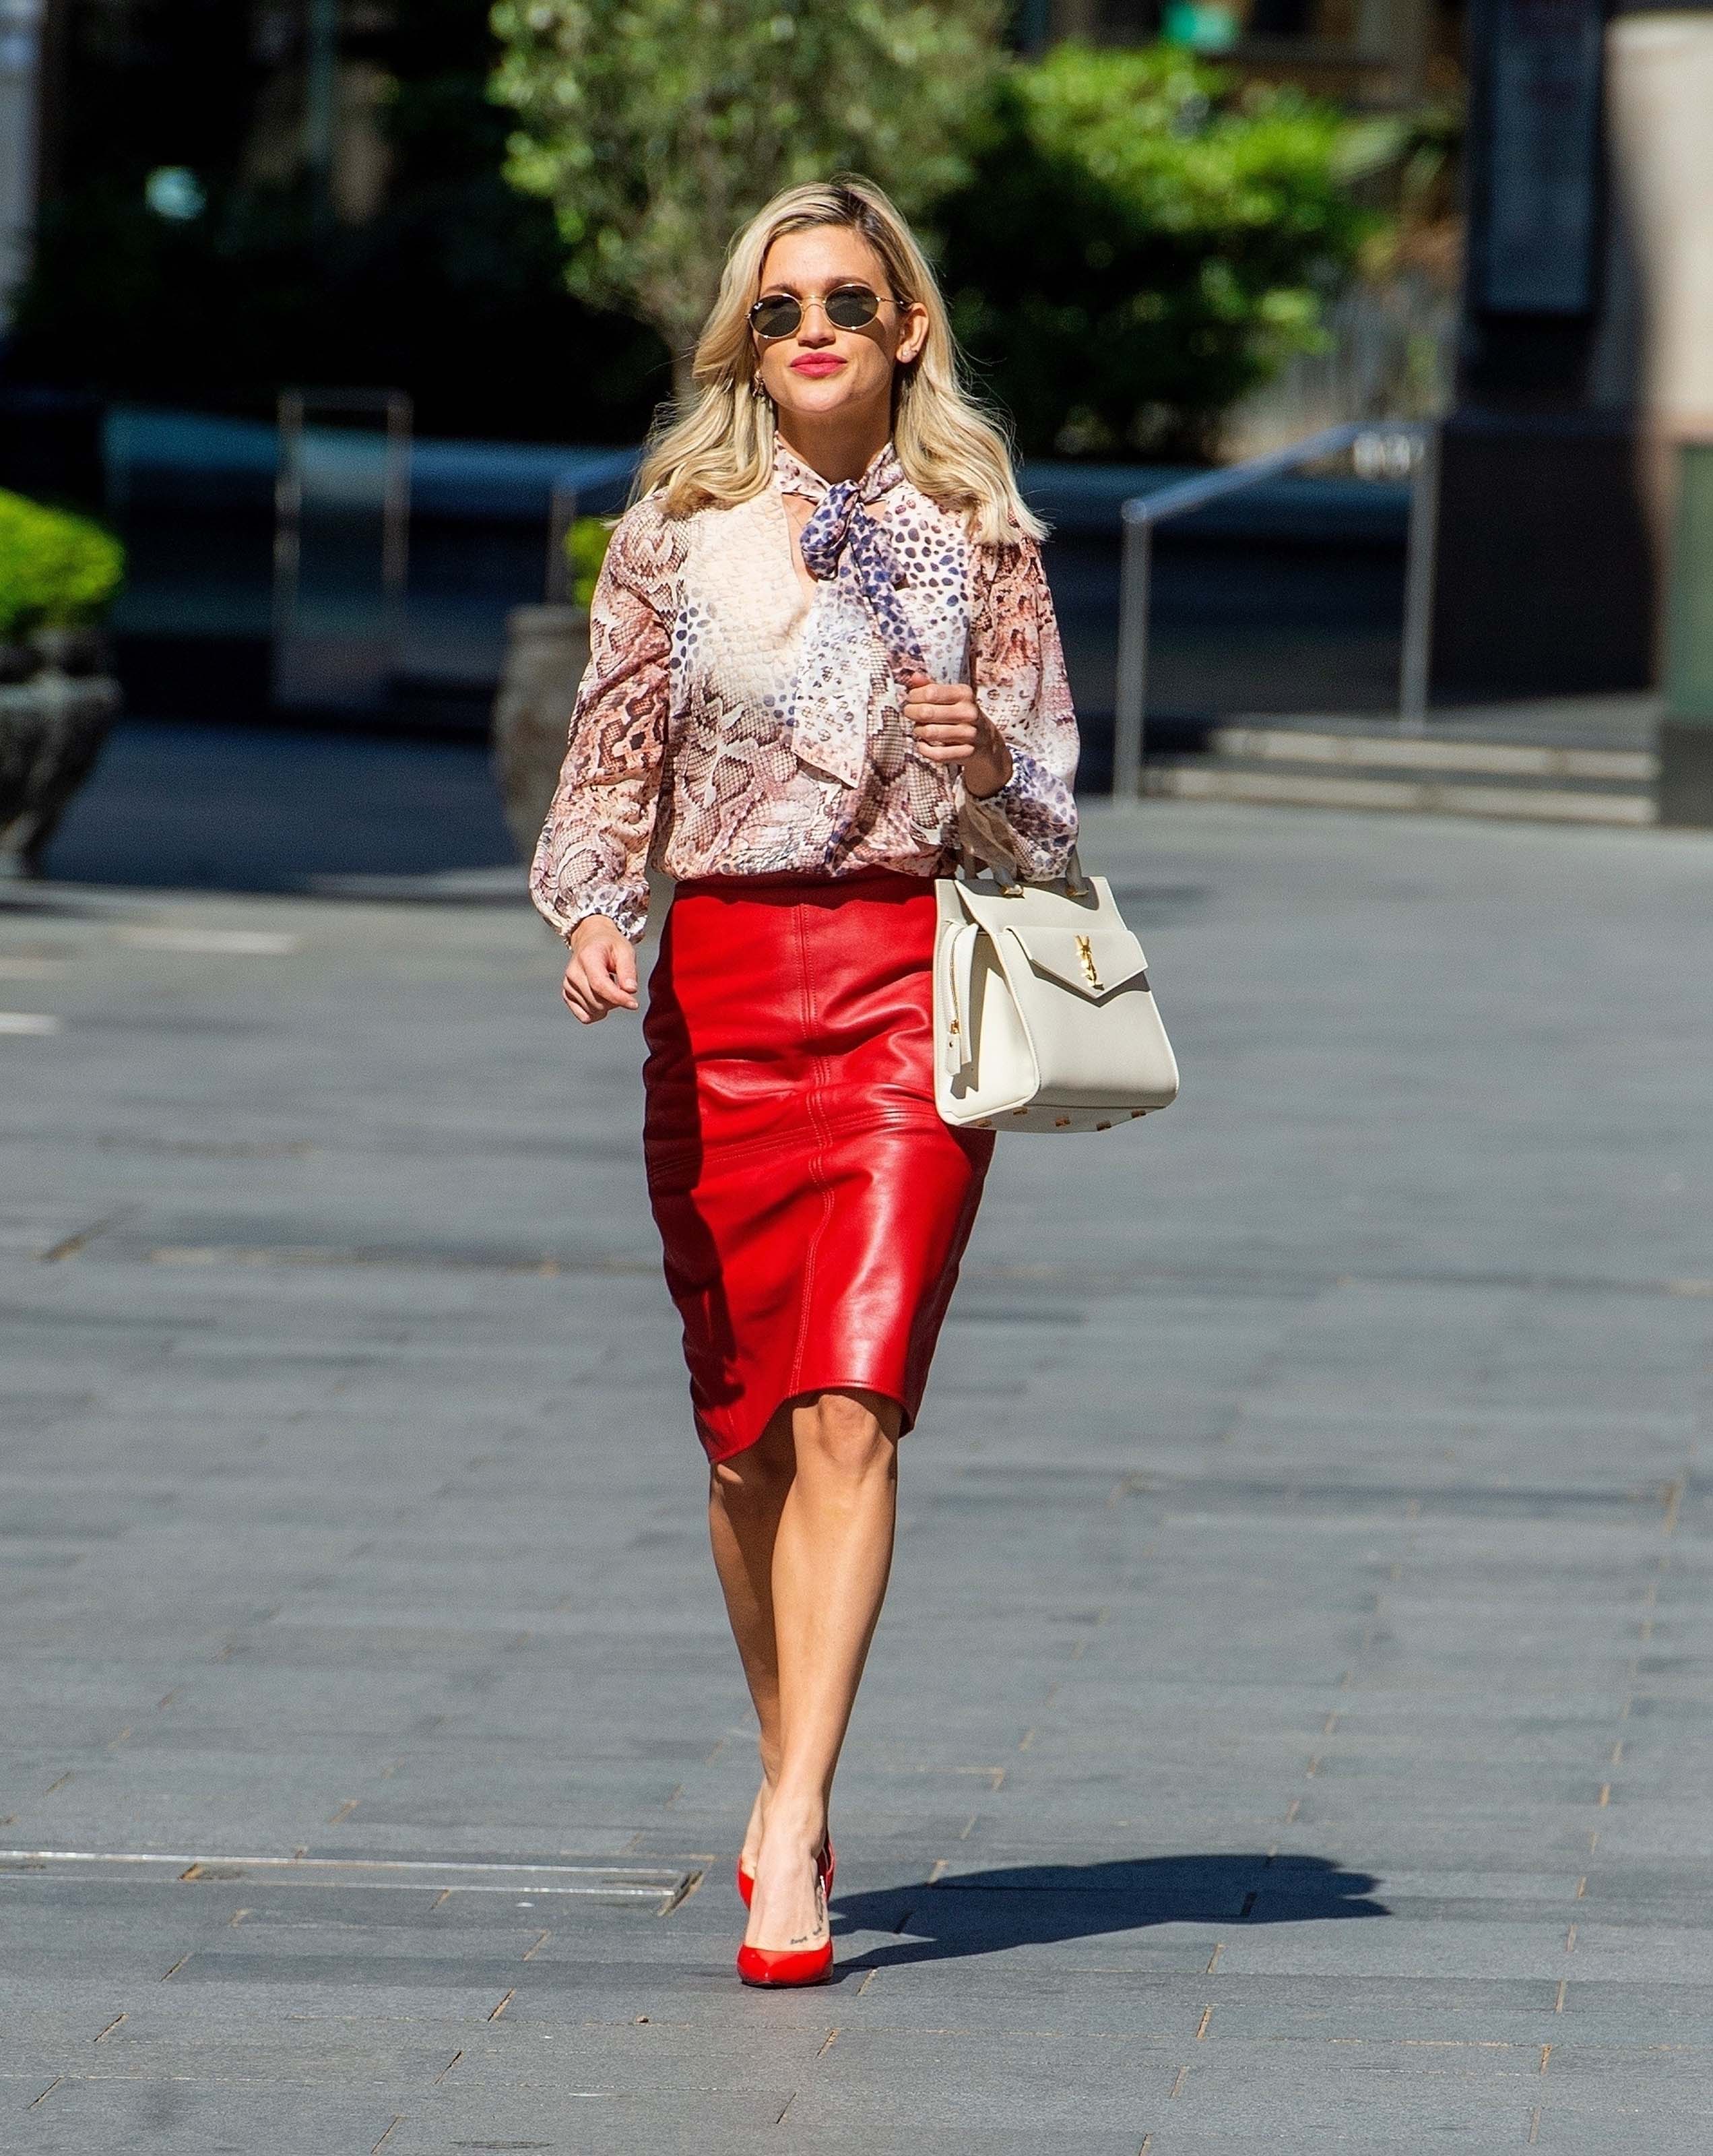 Ashley Roberts looks chic in pencil skirt and print top while leaving the Global studios